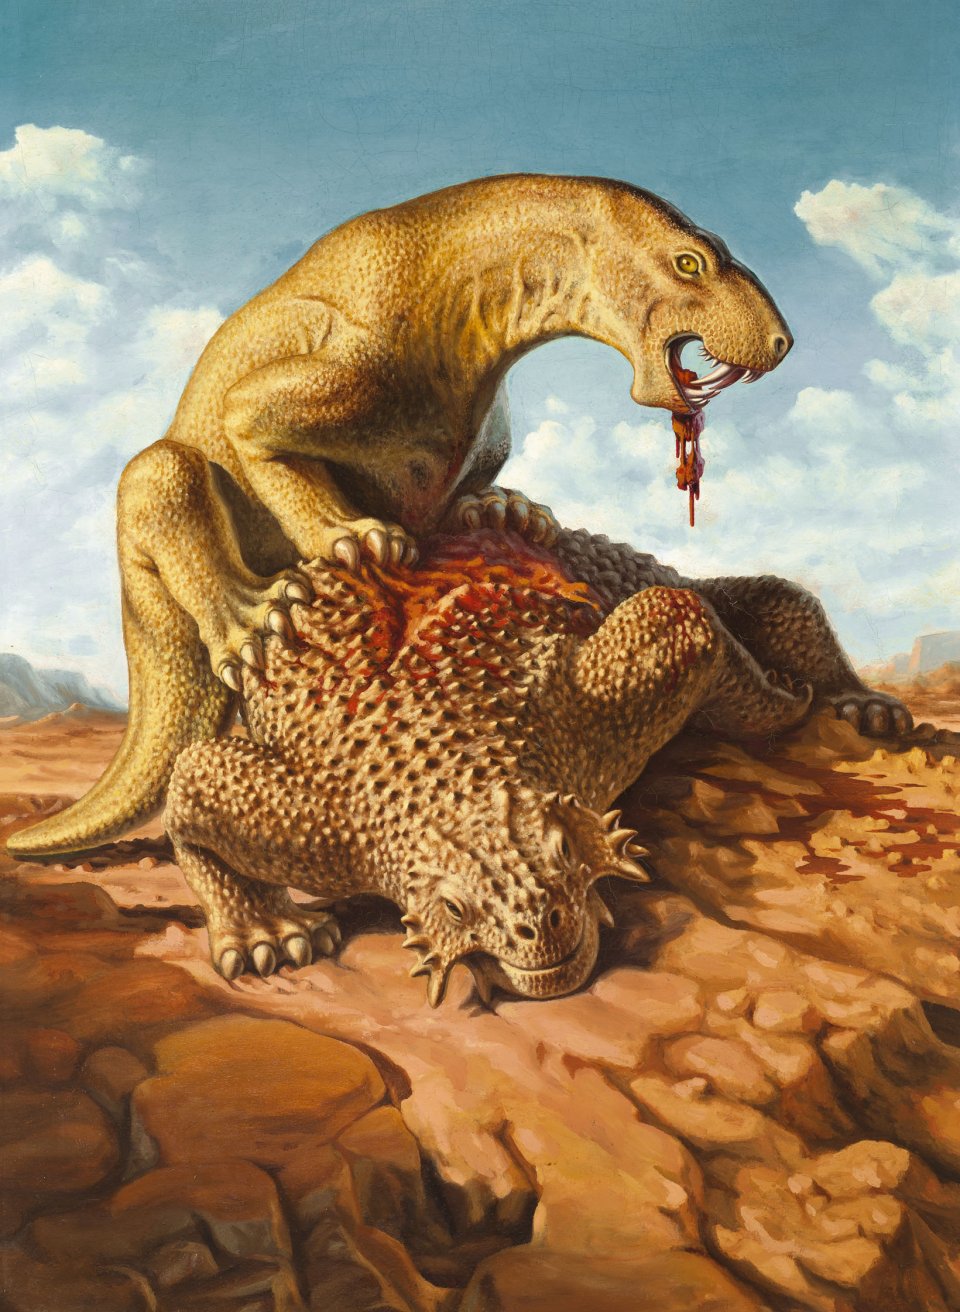 Inostrancevia, devouring a Pareiasaurus Alexei Petrovich Bystrow, 1933 These two species cropped up regularly in Soviet–era paleoart. Konstantin Konstantinovich Flyorov, who painted the same beasts early in his career, despised Bystrow’s interpretation, snidely calling the rival artist “color blind.” Copyright: Borrissiak Paleontological Institute RAS